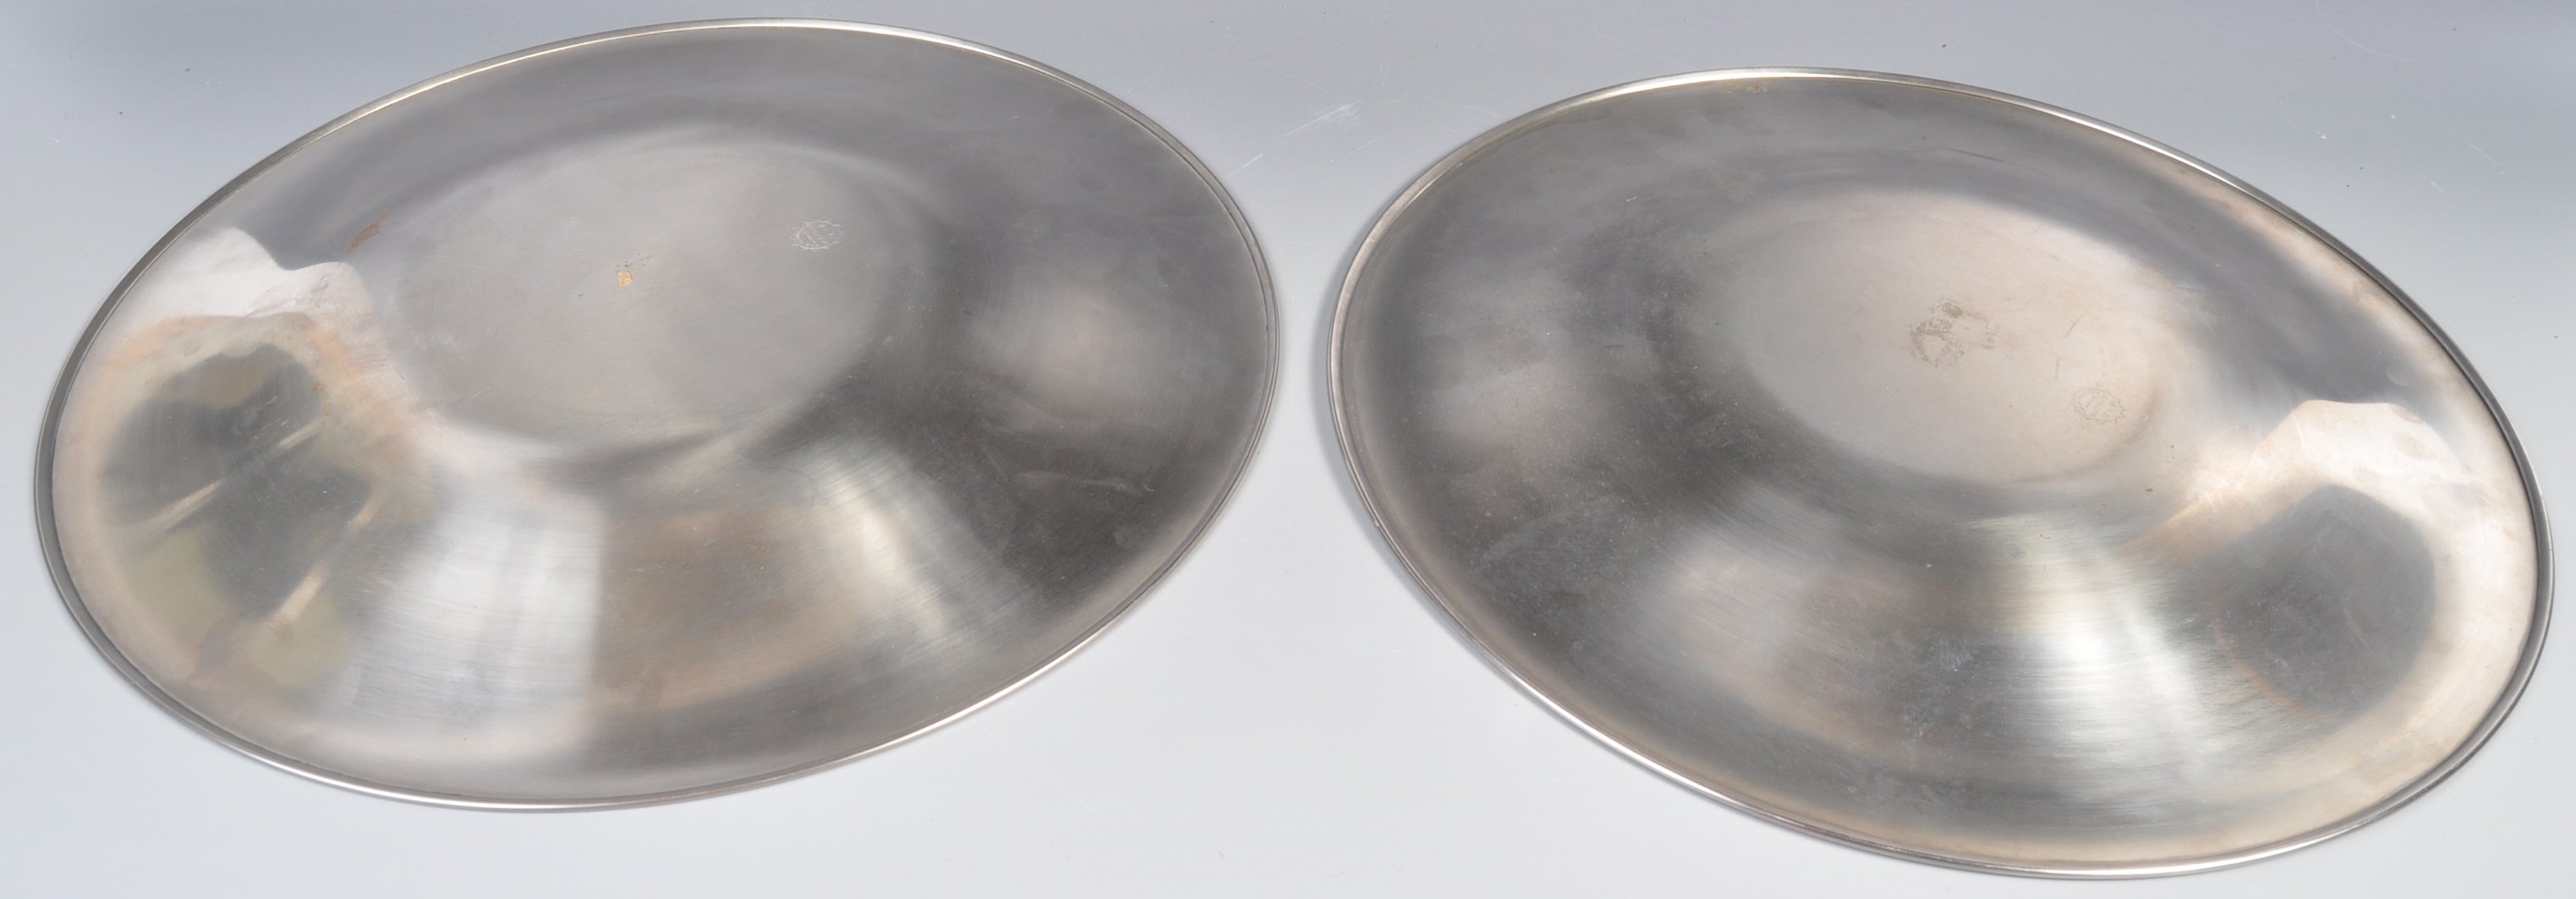 PAIR OF DANISH STAINLESS STEEL PLATES BY LONE SACHS FOR LUNDTOFTE - Image 4 of 8